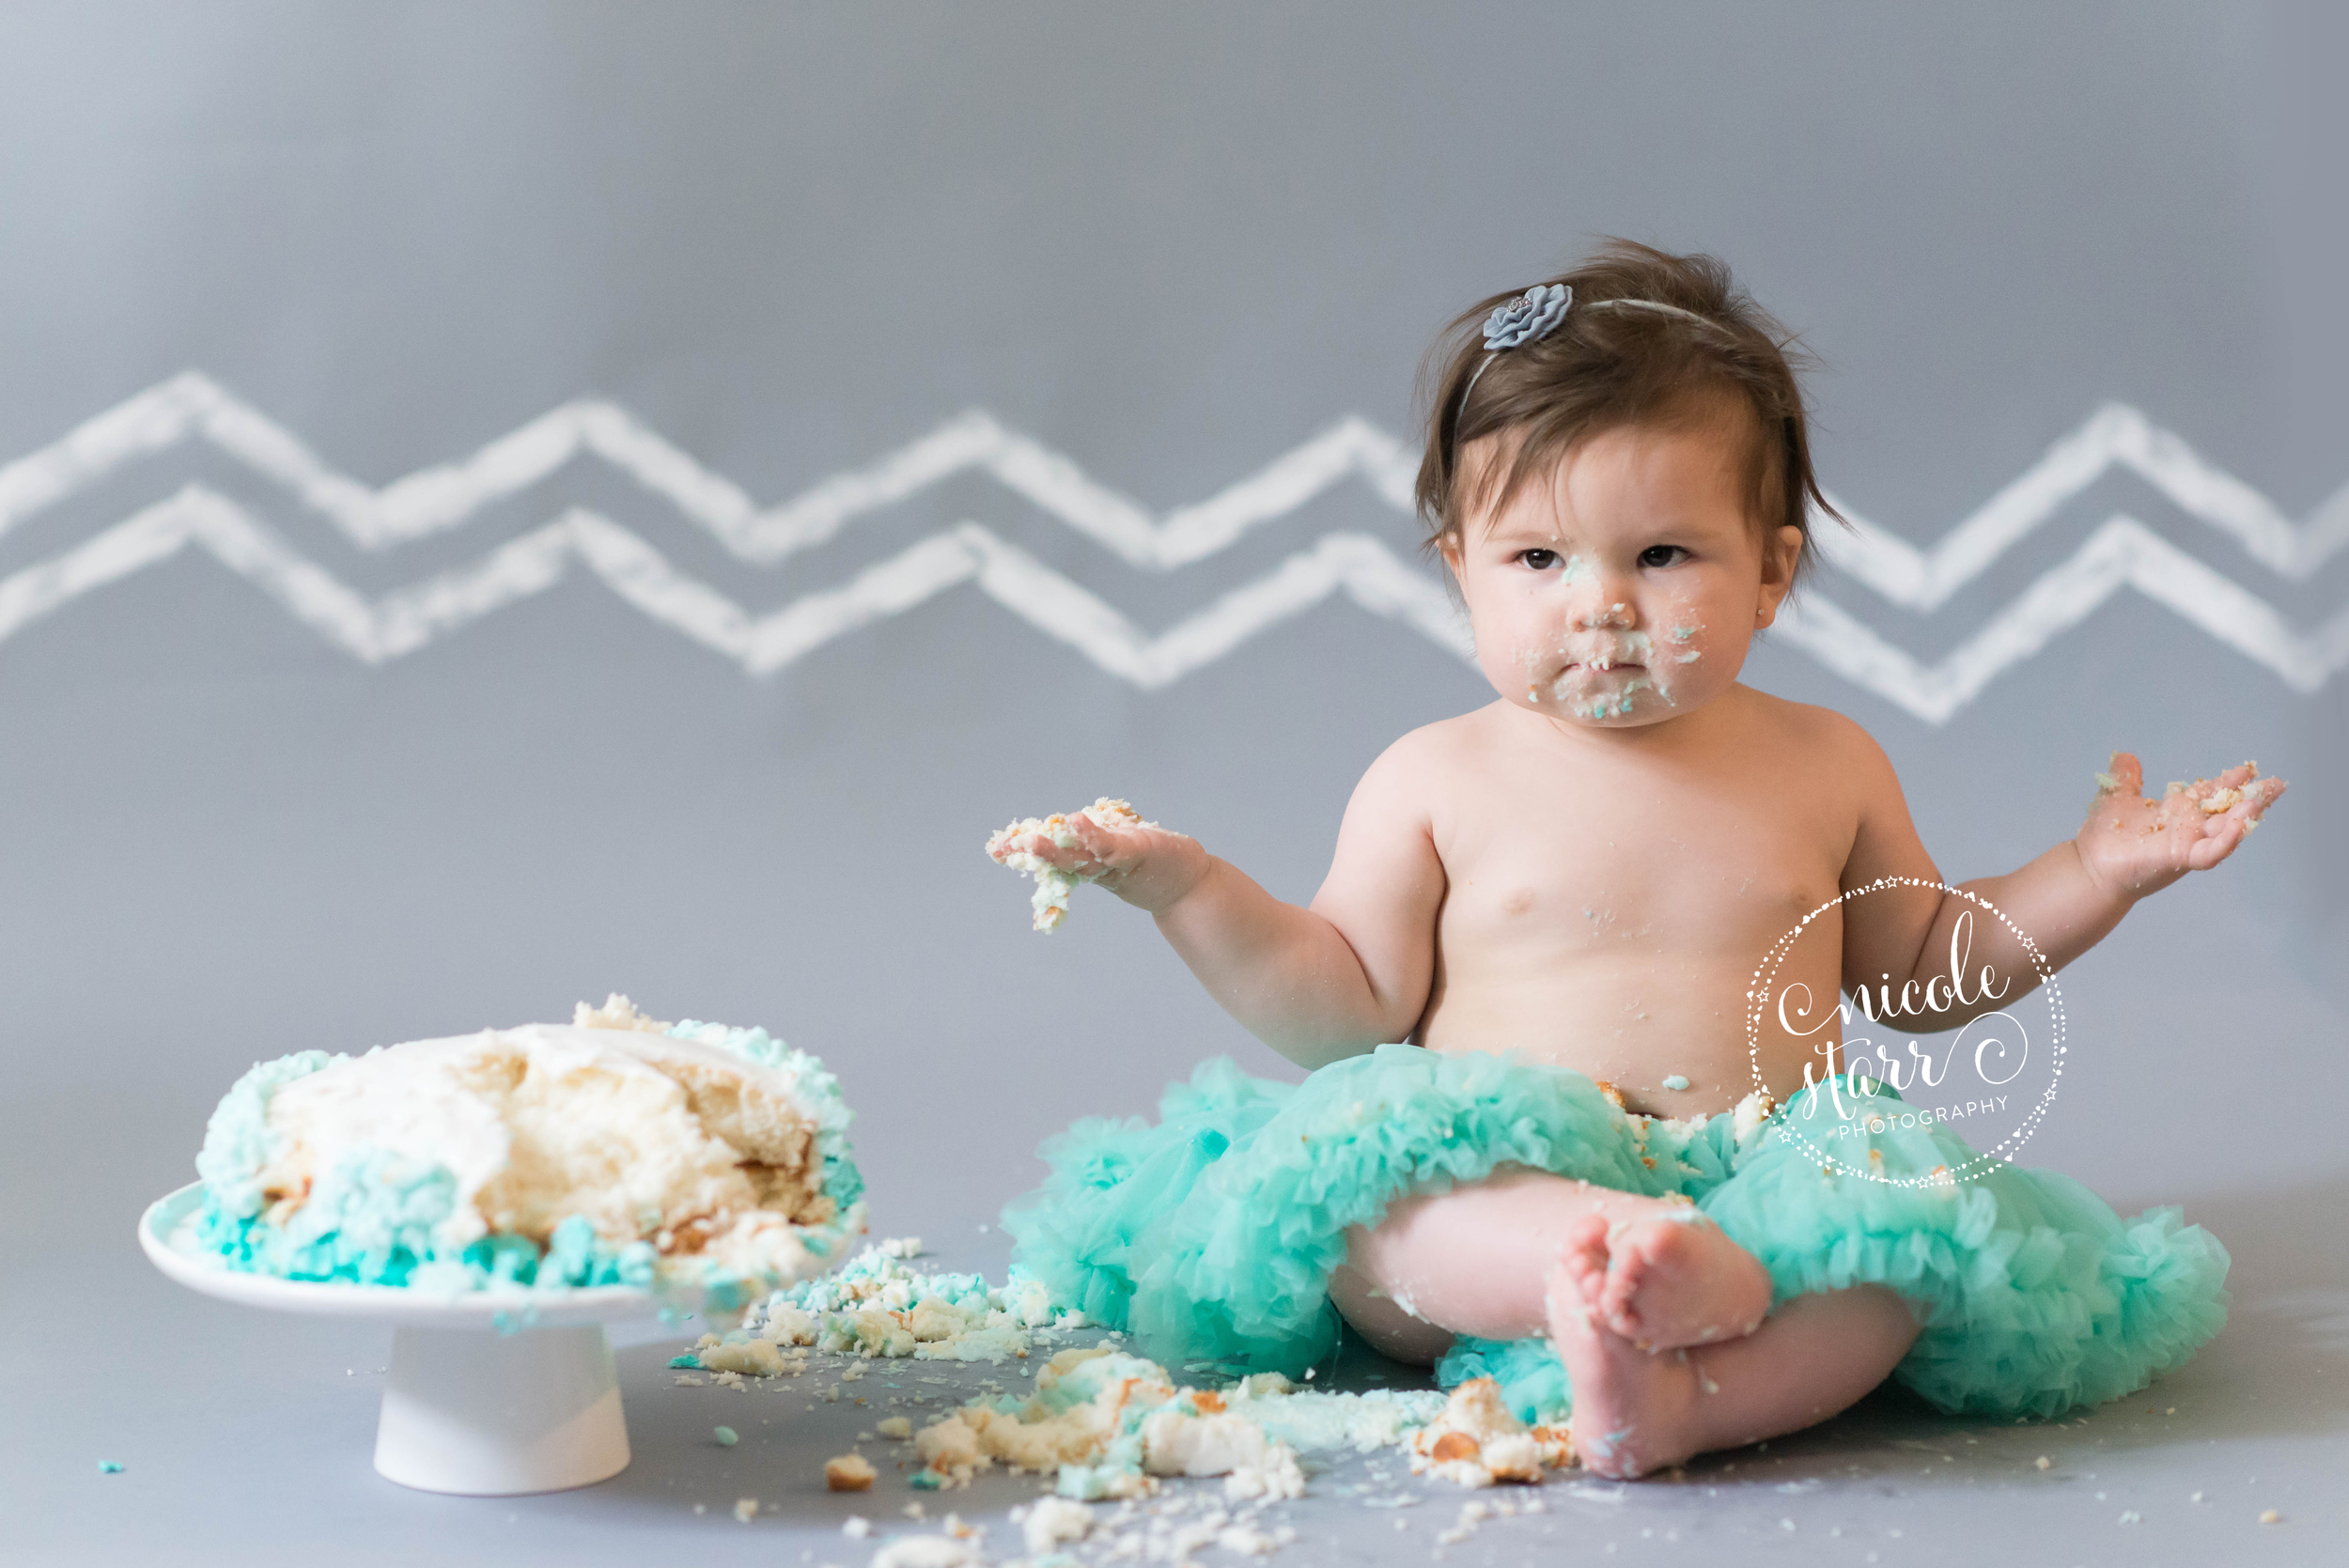 baby sign language all done with birthday cake smash